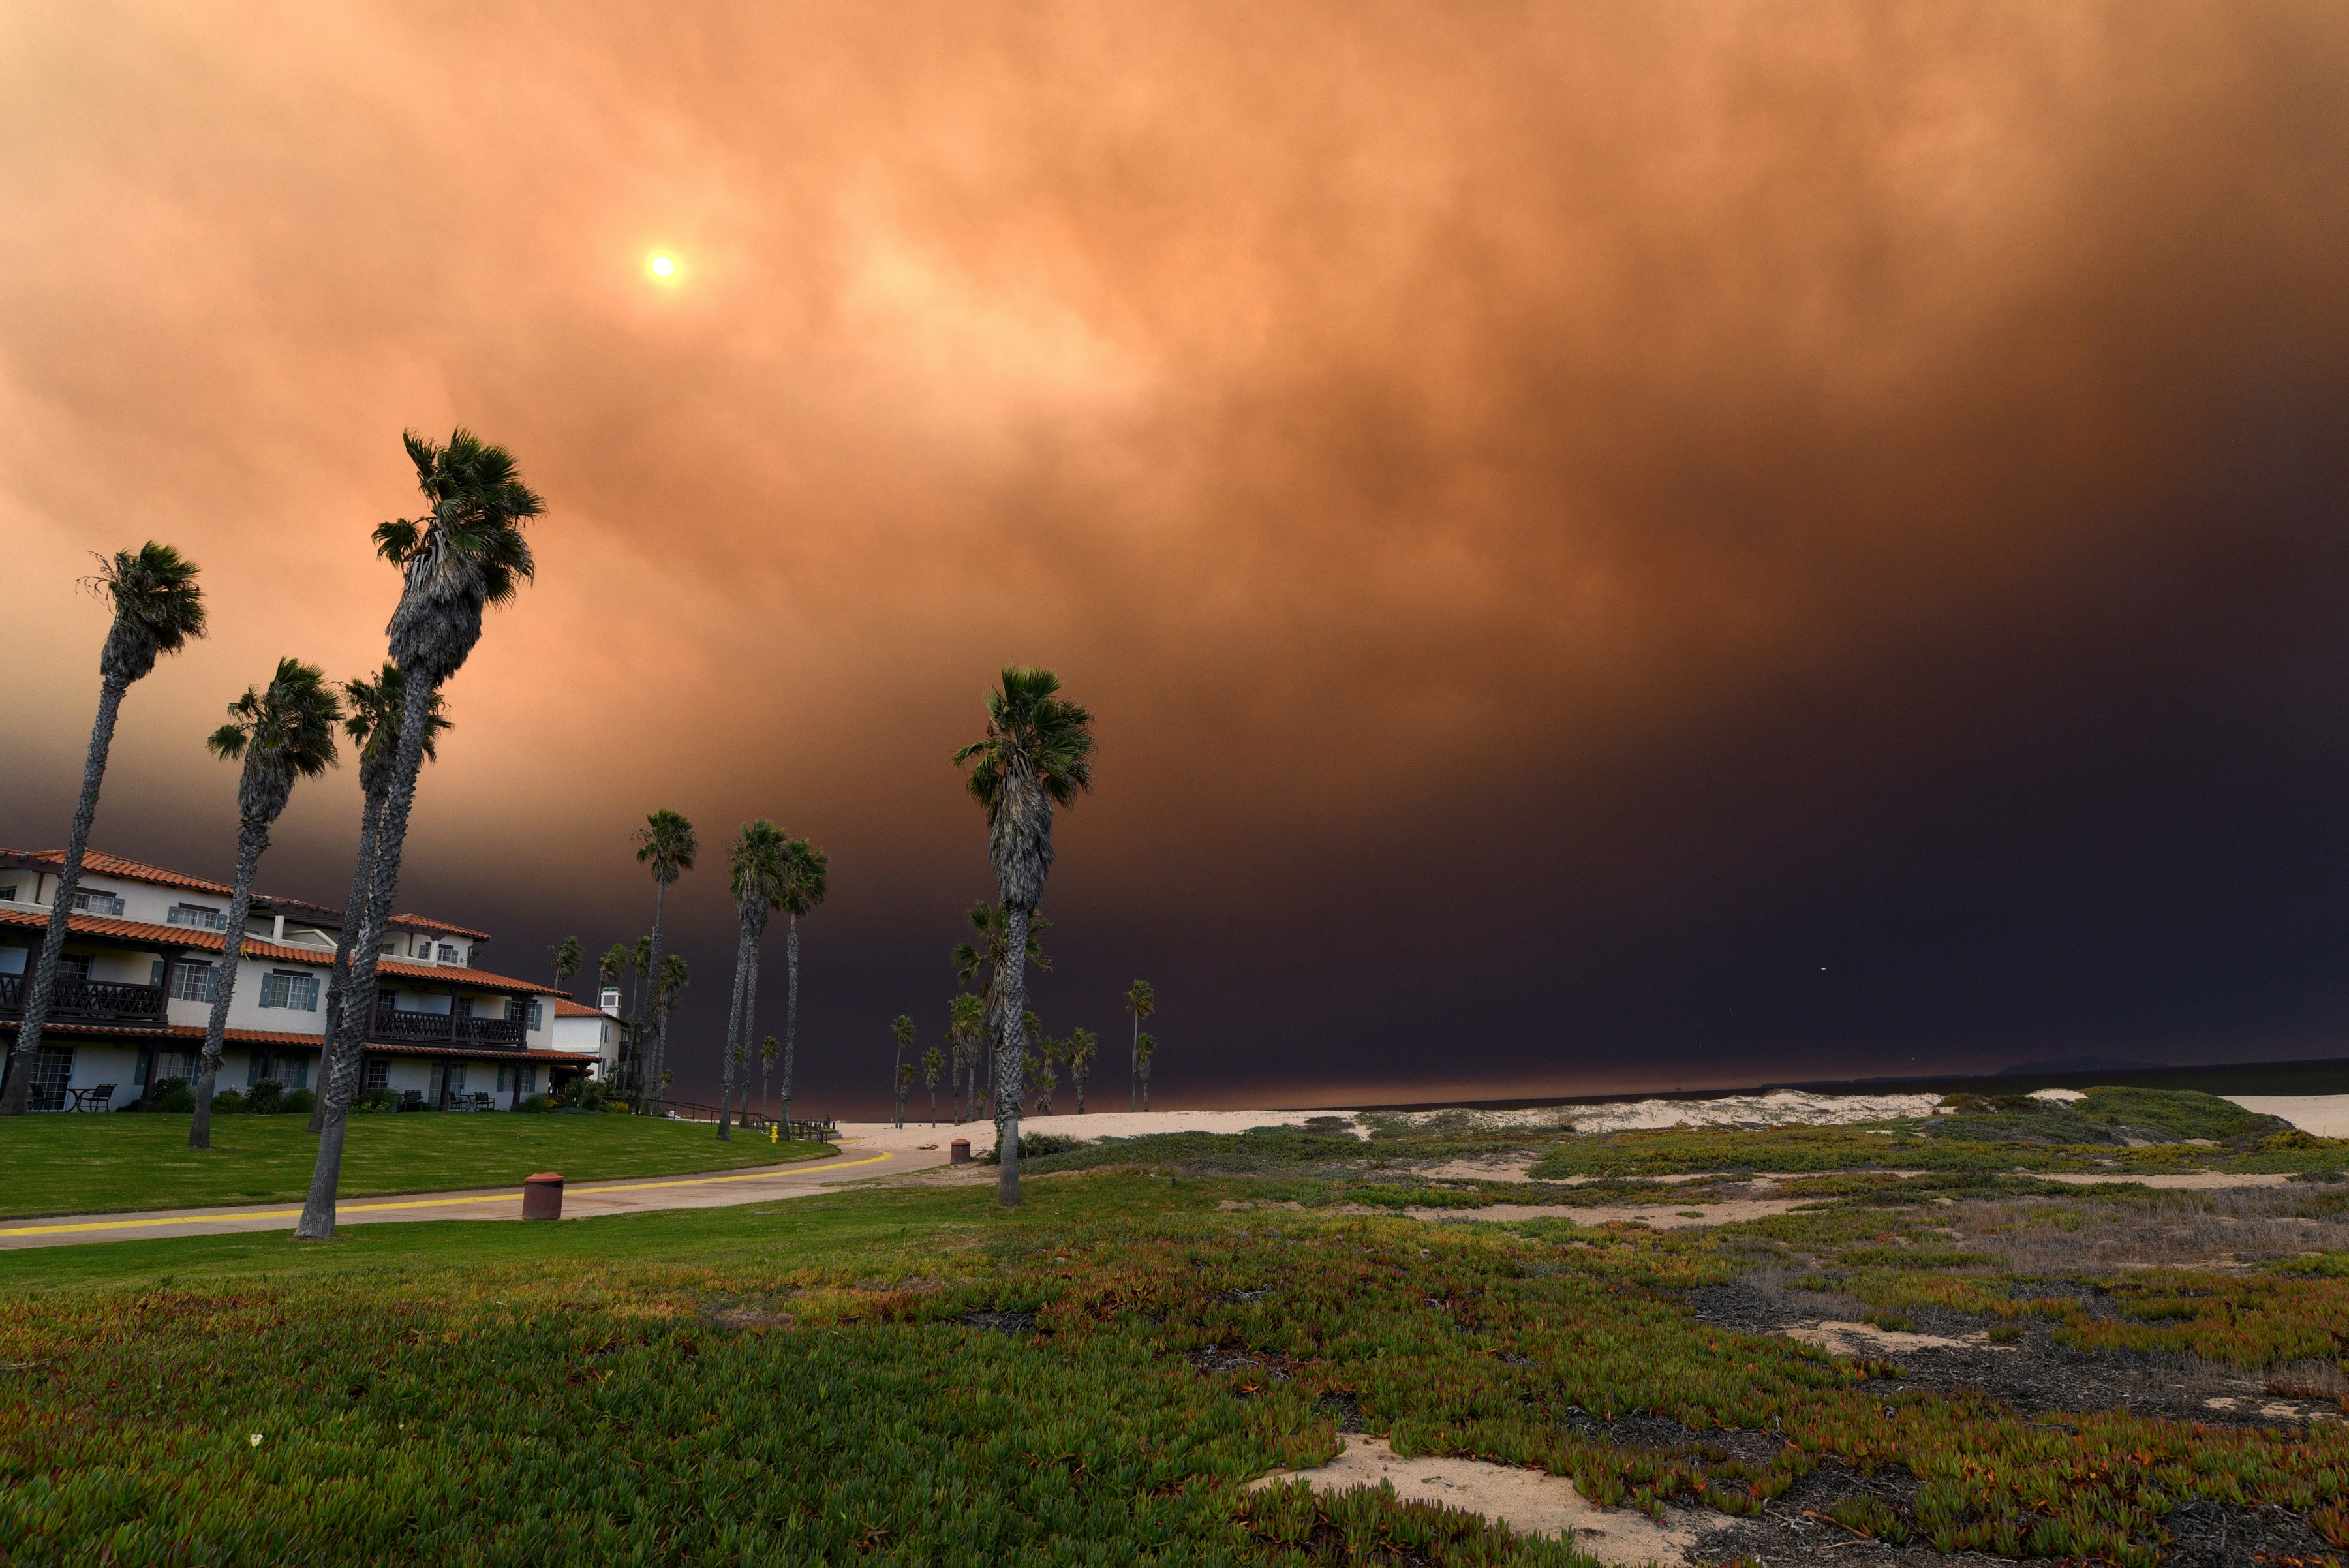 a smoky sky with an orange glow over a beach bike path lined with palm trees with a white hotel in the background